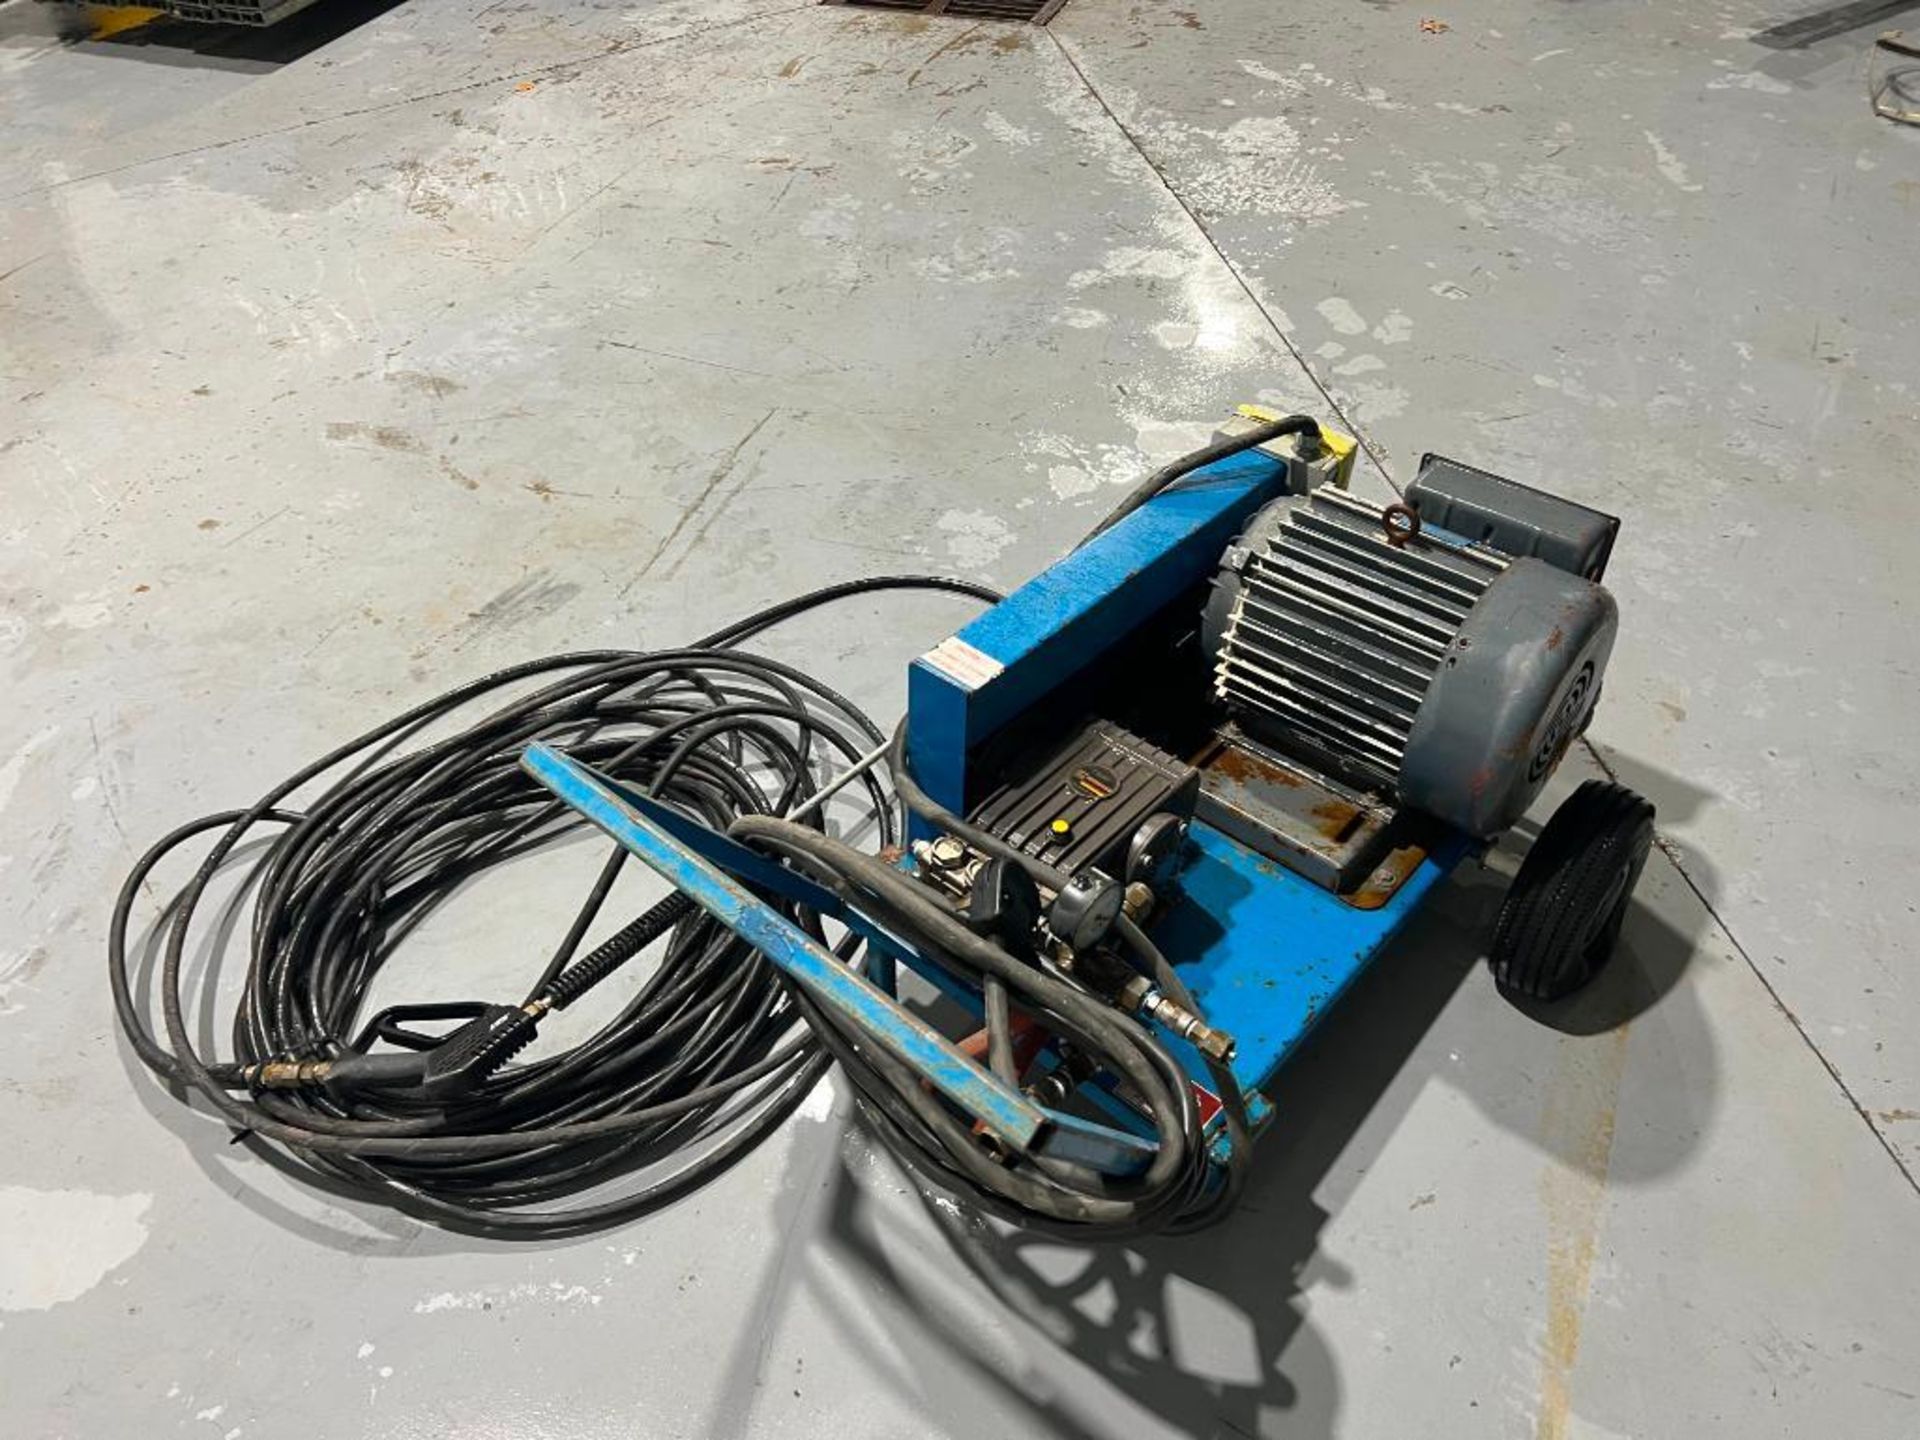 Dultmeier Sales Pressure Washer Farm 25, Model #DU PMT9281B, Serial #31 with Wand and Hose. Located - Image 15 of 16